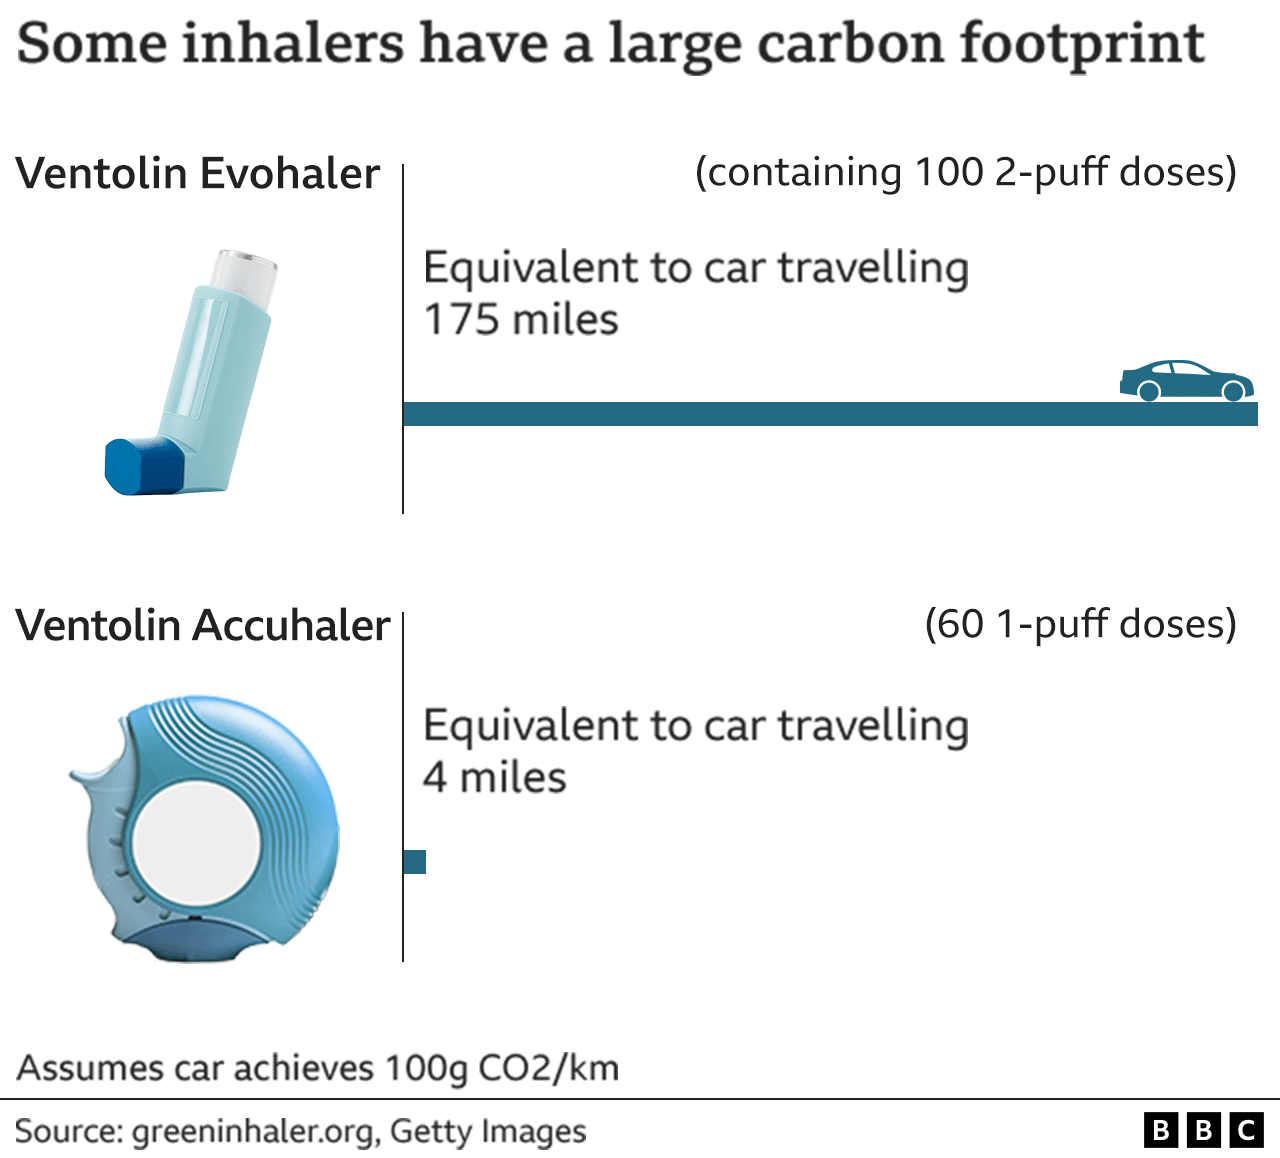 The relative carbon footprint of different inhalers